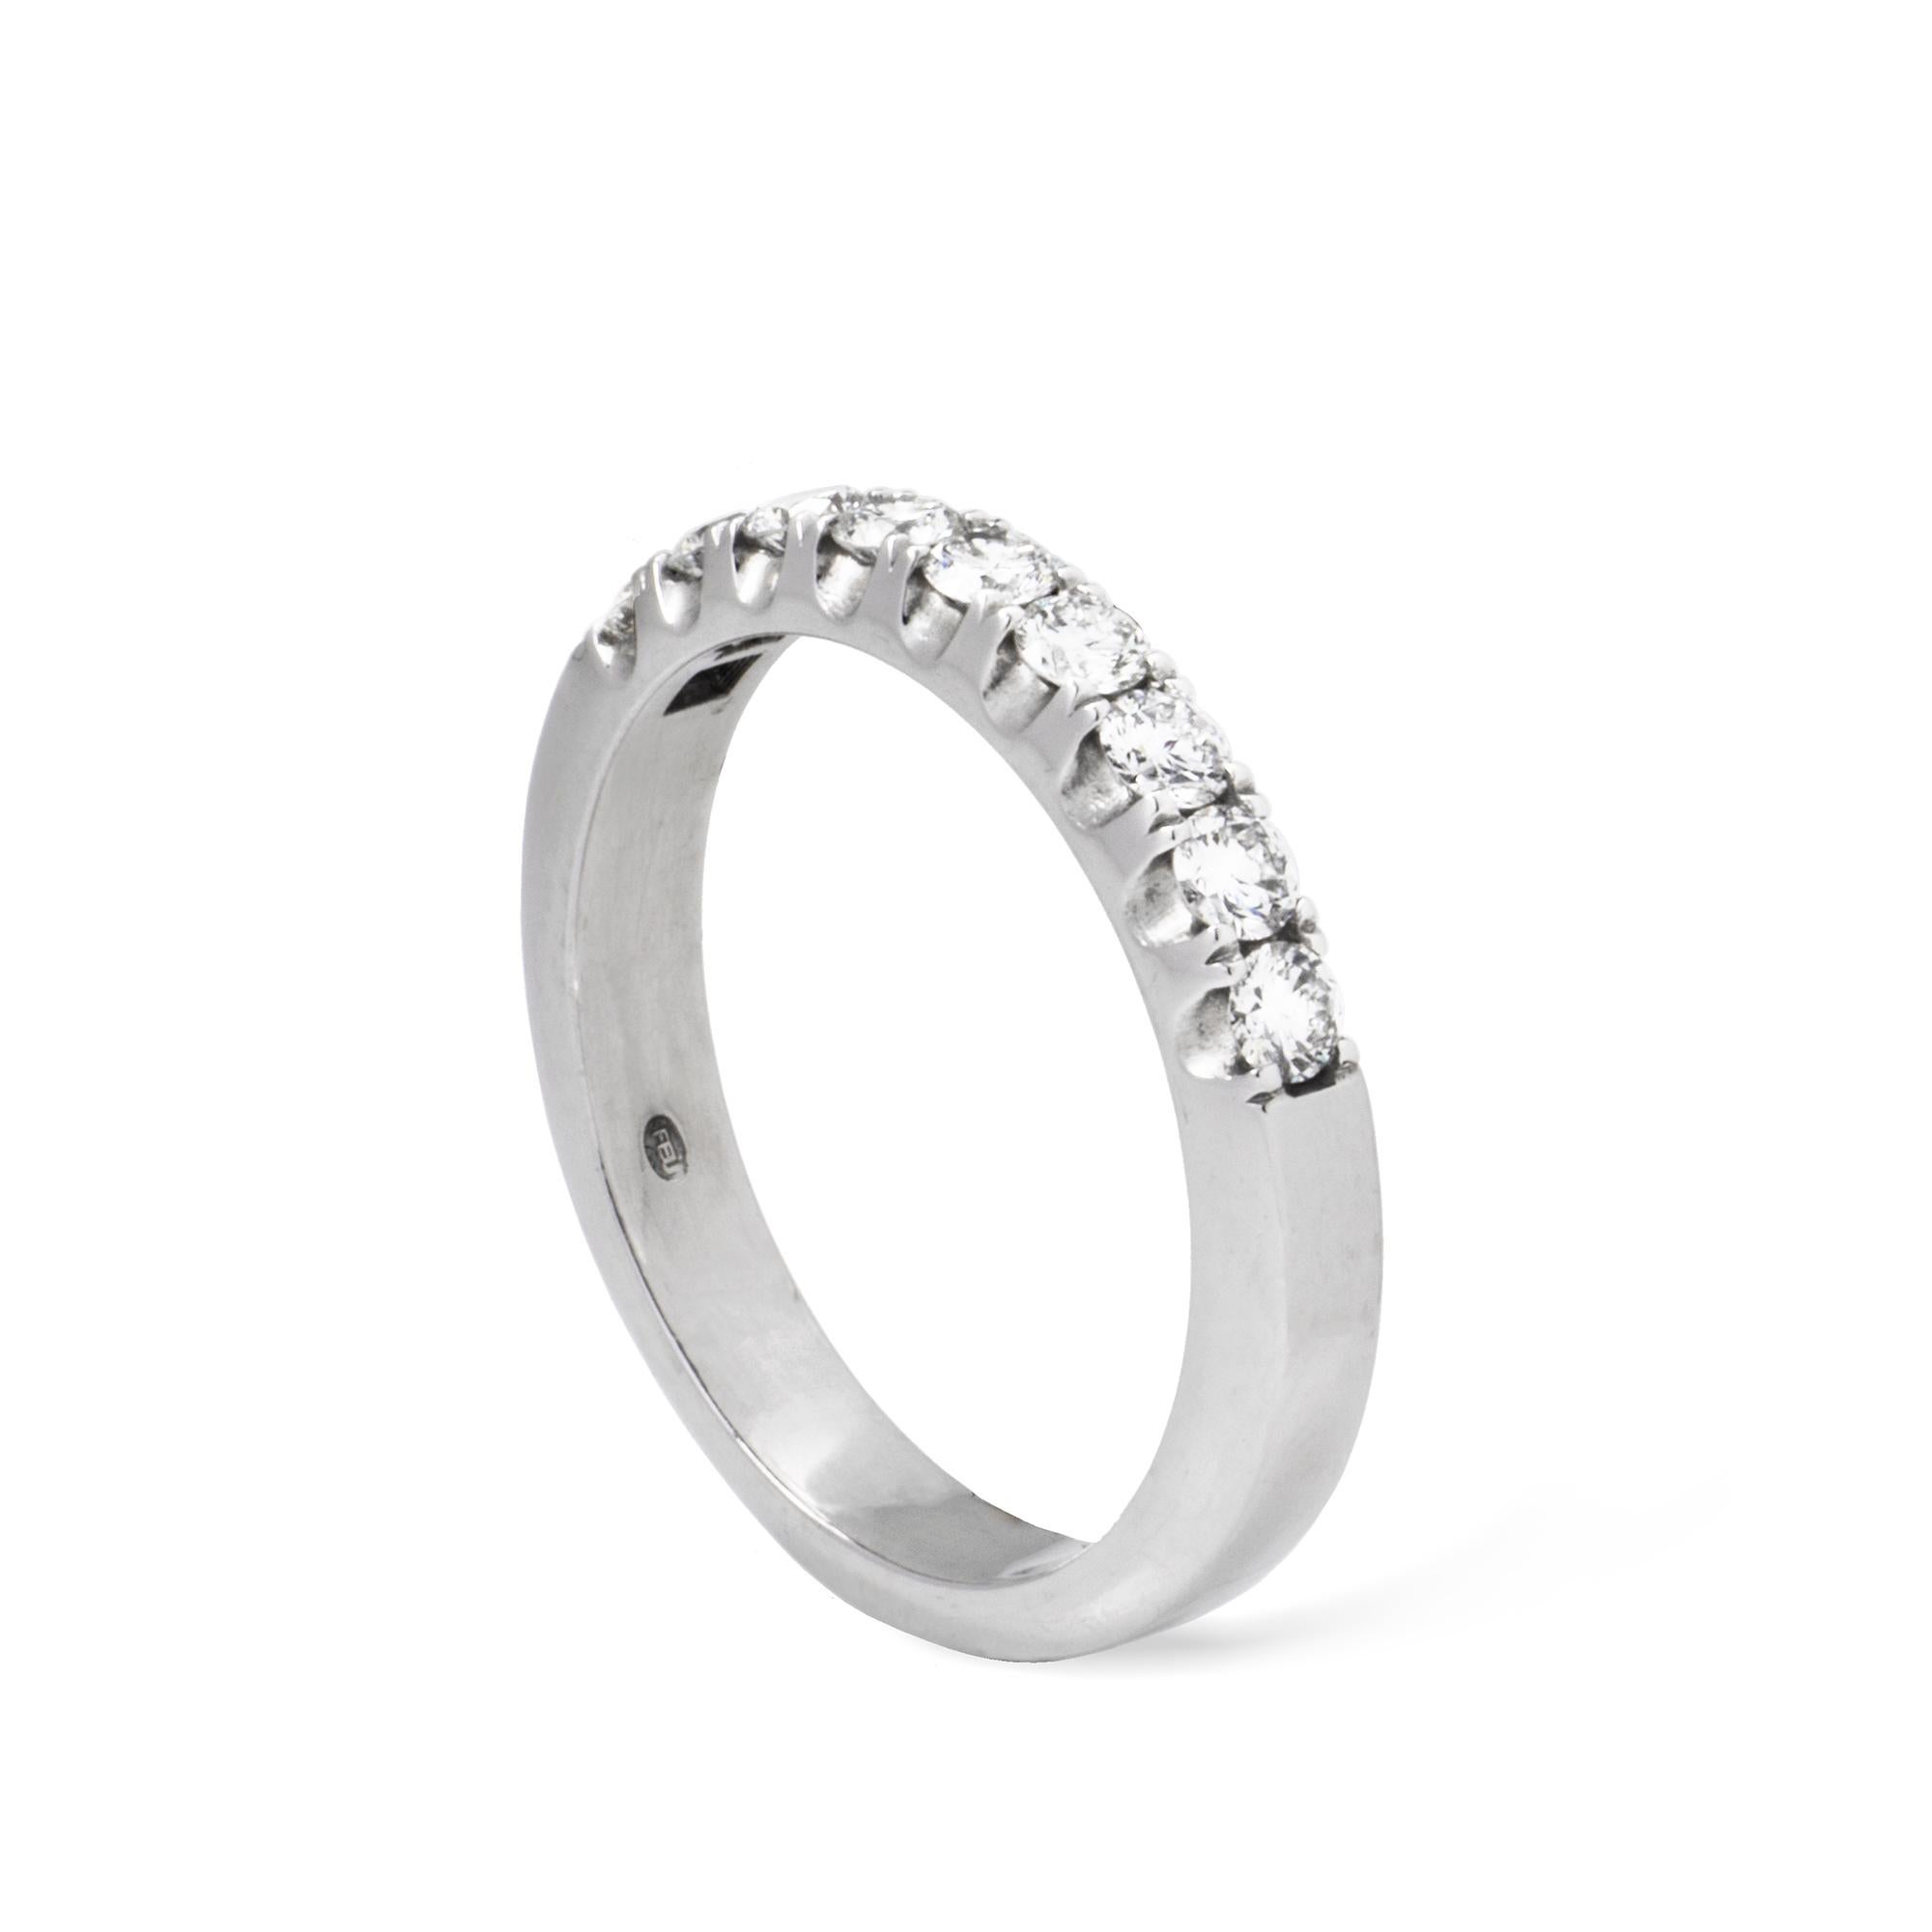 A diamond half eternity ring, the nine round brilliant-cut diamonds, weighing 0.50 carats in total, claw-set to a platinum mount, gross weight 5.9 grams, hallmarked platinum, London 2018. NRV

A simple and sleek diamond set half eternity band. This